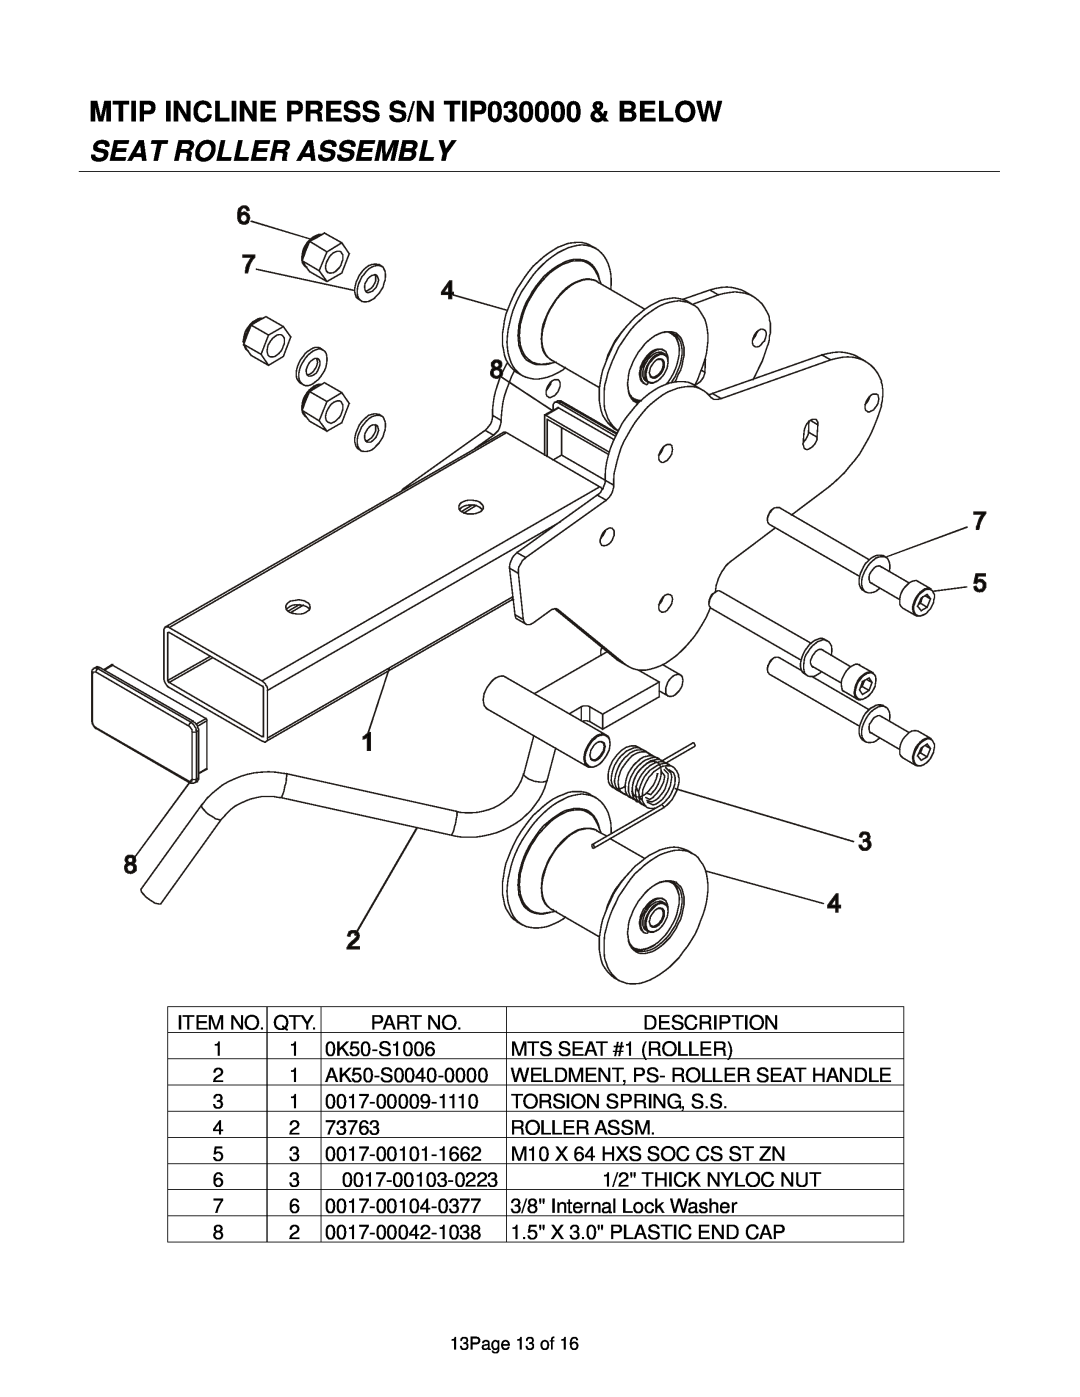 Life Fitness manual MTIP INCLINE PRESS S/N TIP030000 & BELOW SEAT ROLLER ASSEMBLY 